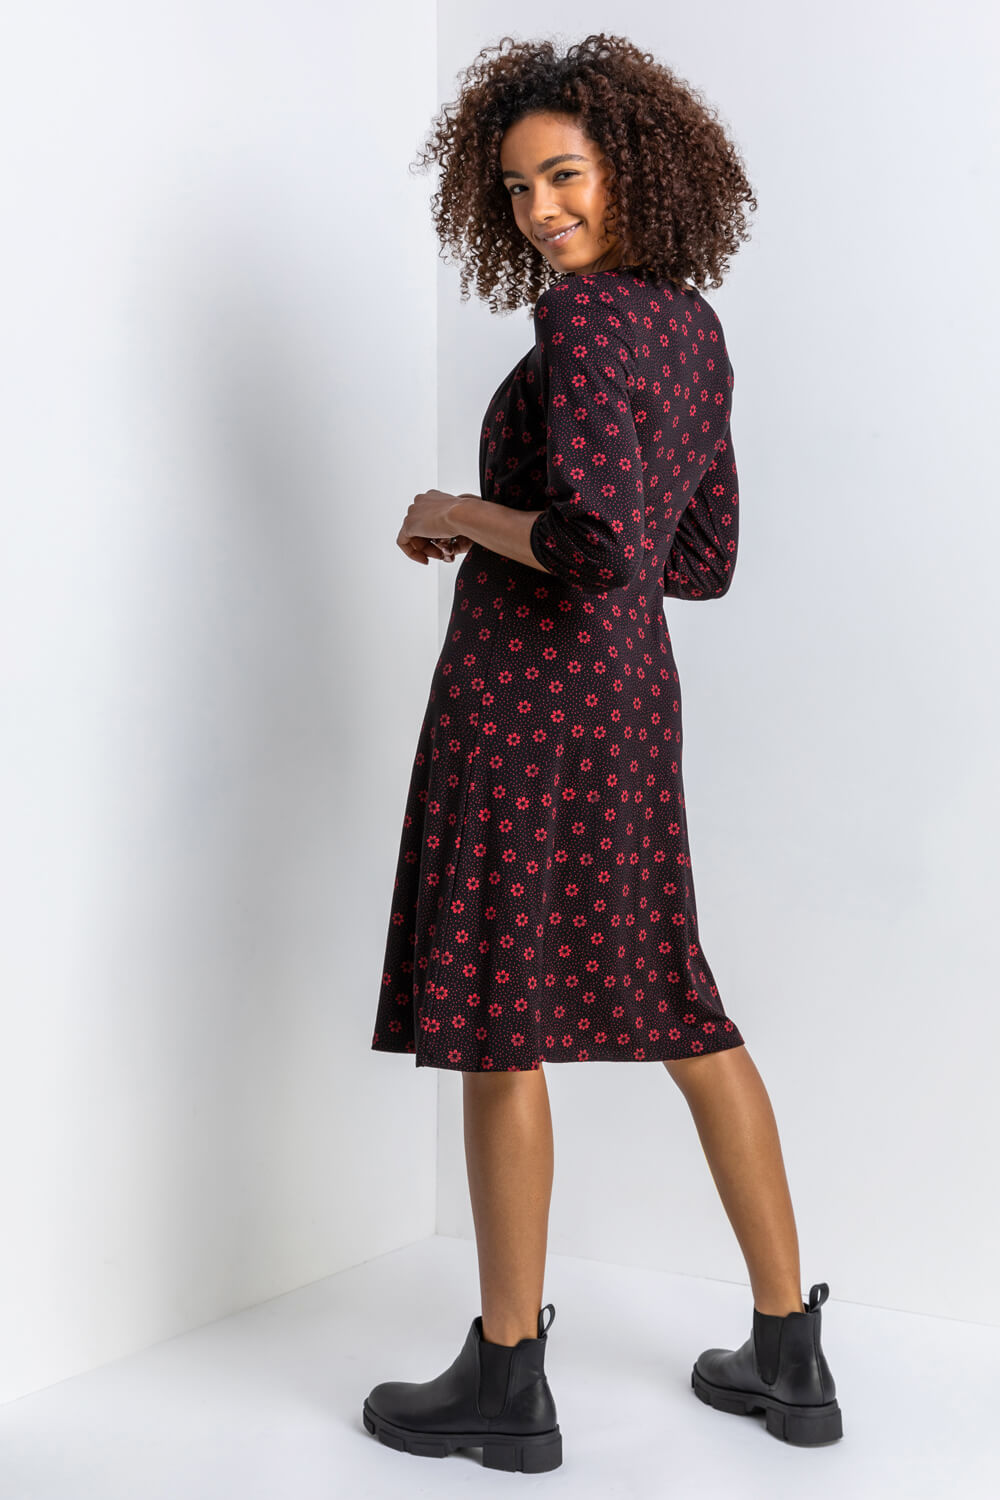 Red Square Neck Floral Spot Print Dress, Image 2 of 5